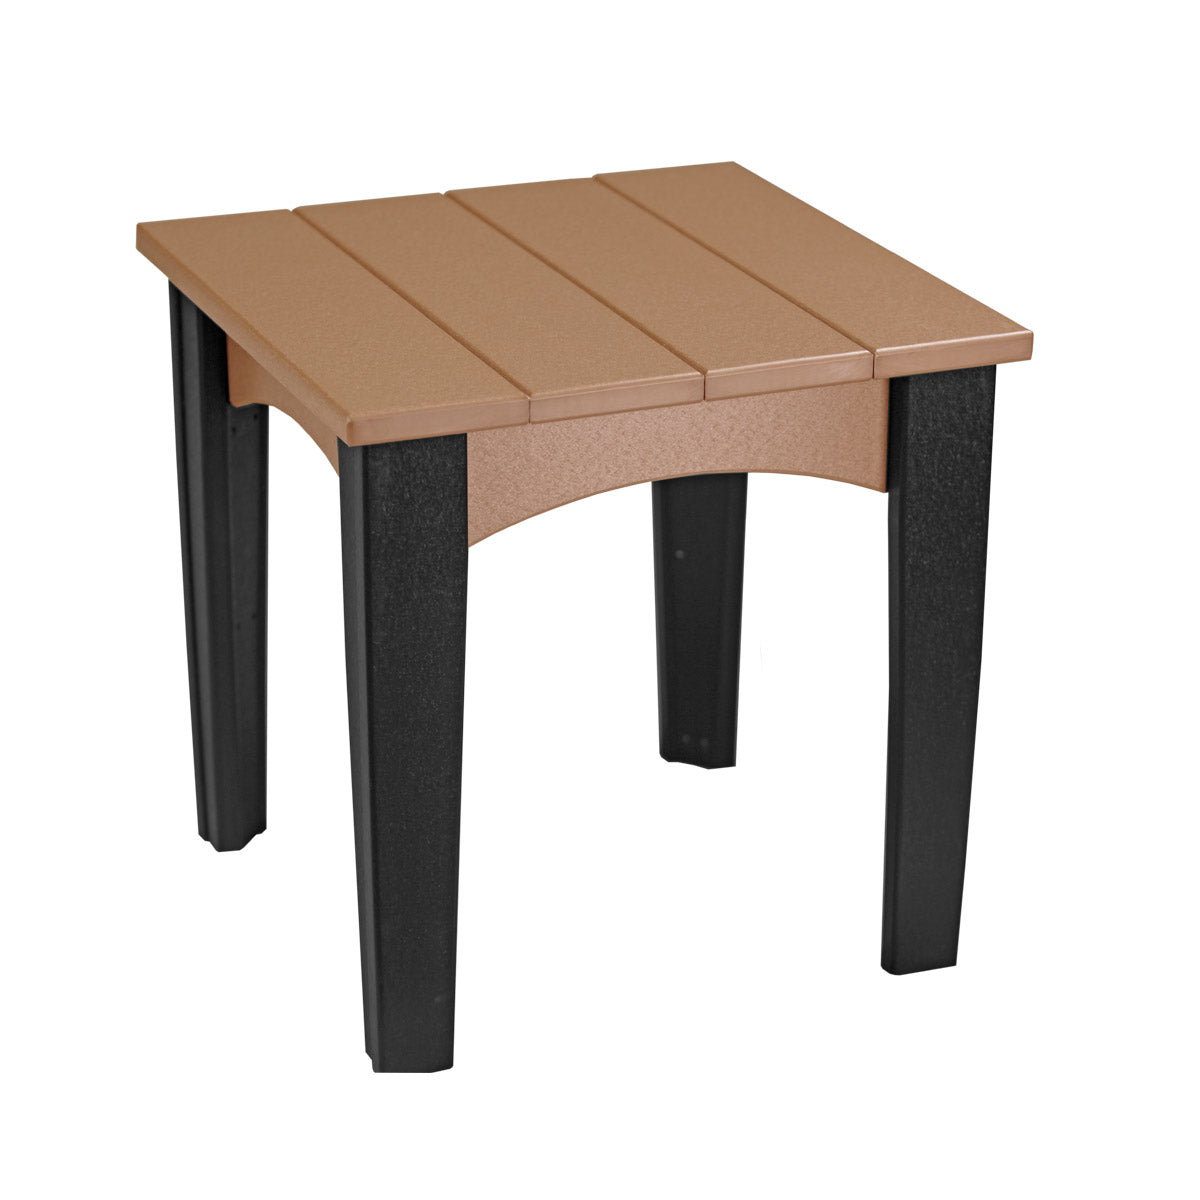 Luxcraft Island End Table IET